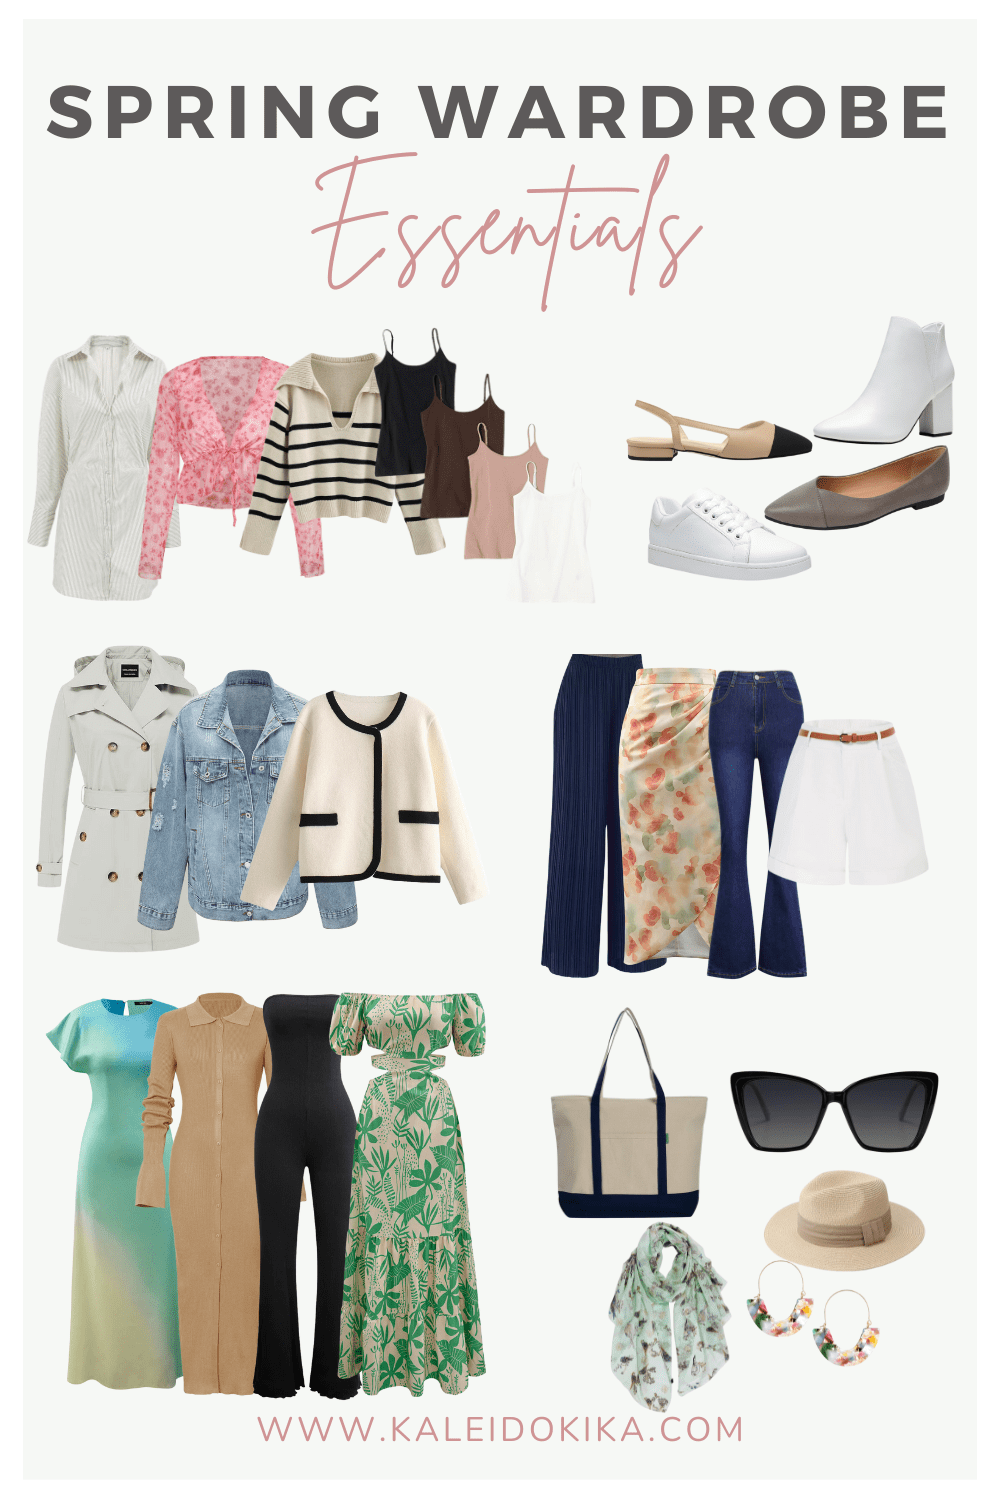 Image showing some spring wardrobe essentials for women